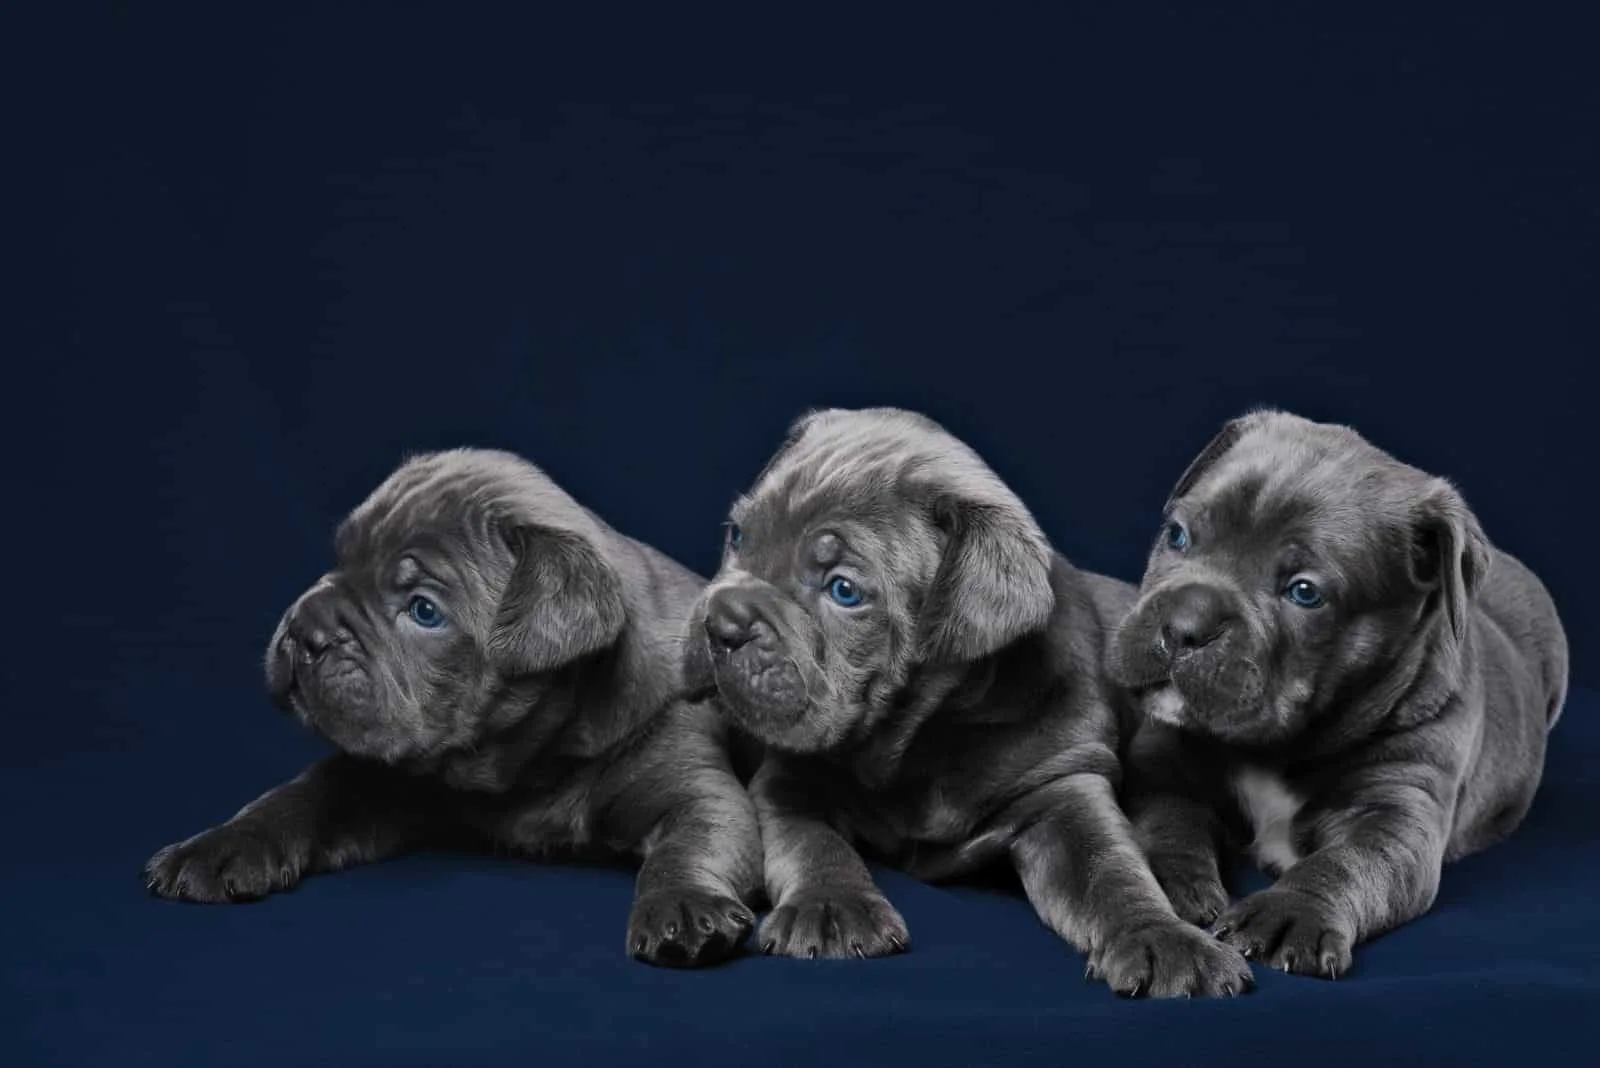 cane corso great dane puppies in black background